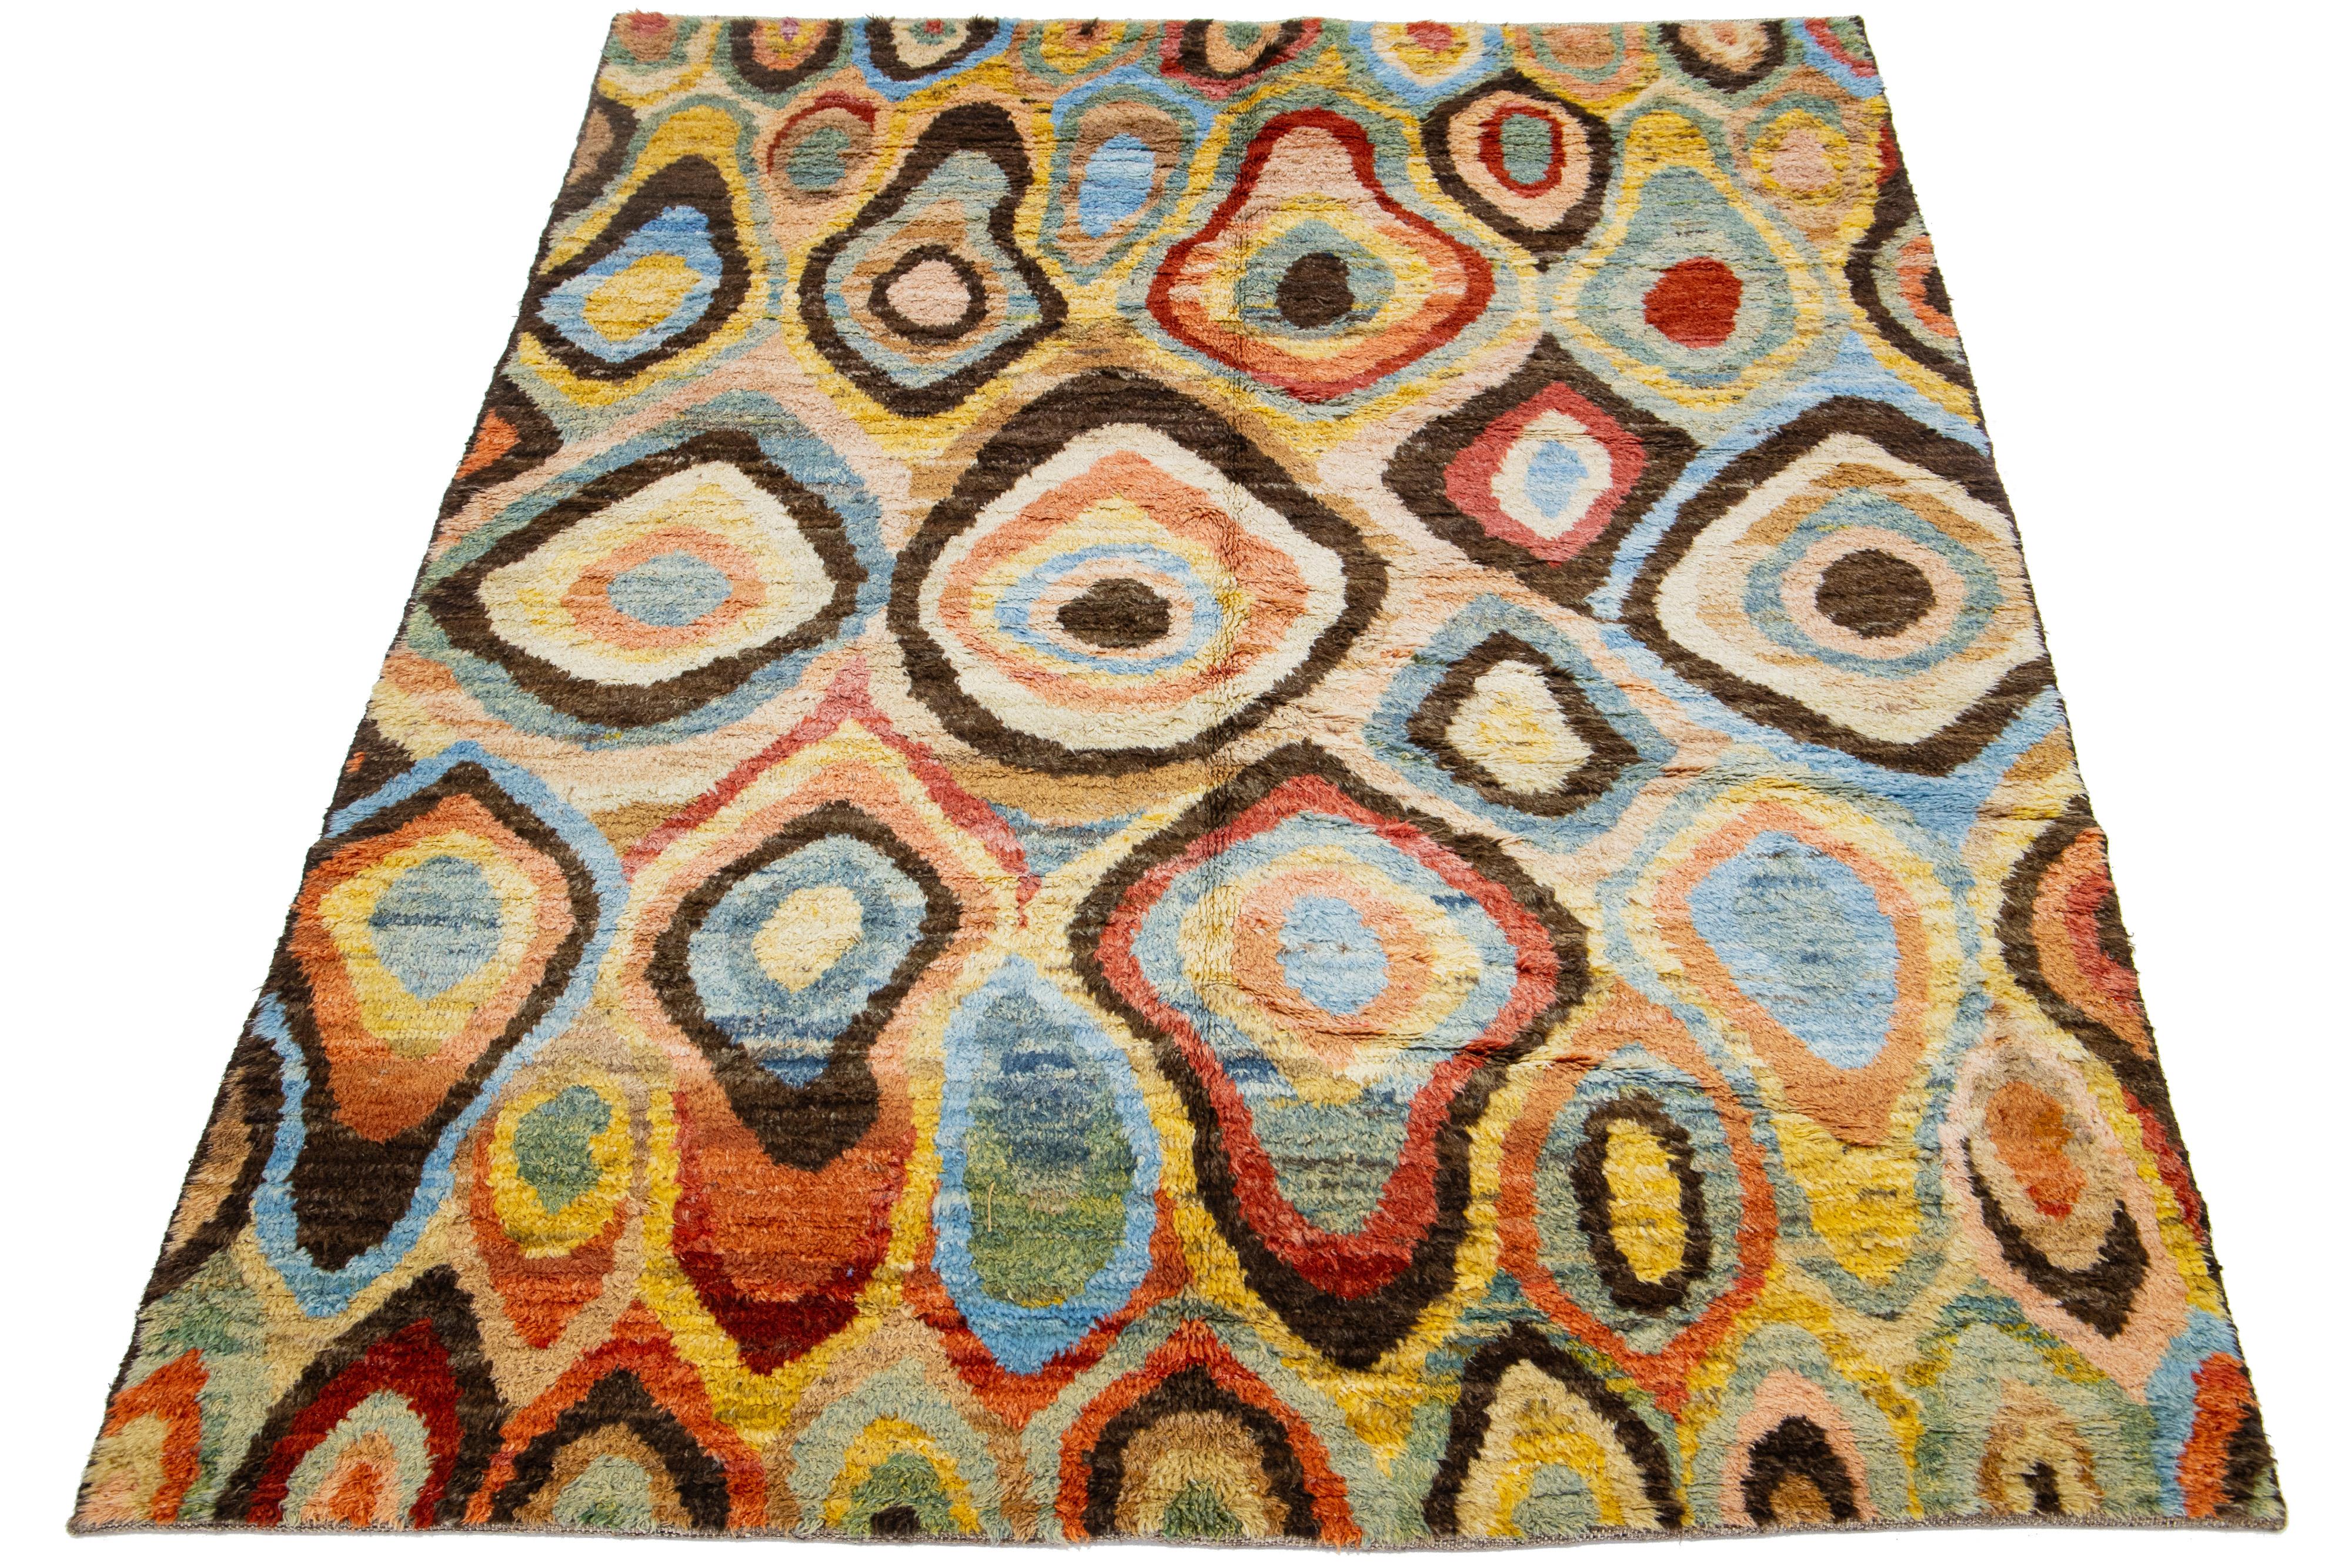 This beautiful, modern Moroccan-style, hand-knotted wool rug features a multicolor field. Highlights a stunning, soft, geometric design.

This rug measures 6'2